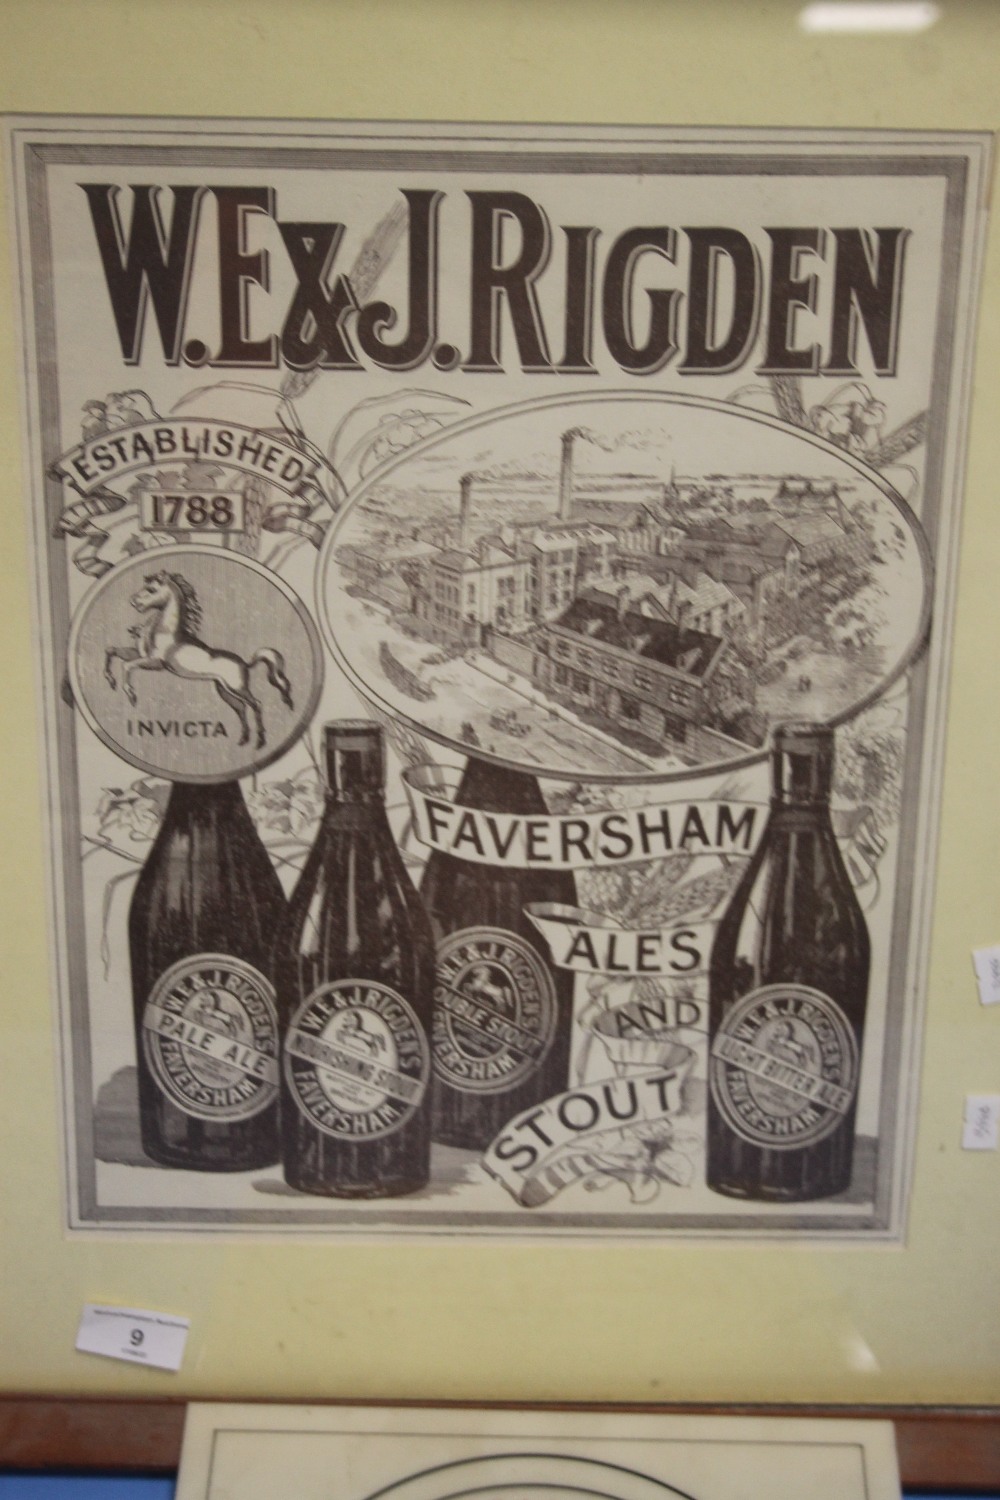 TWO VINTAGE BEER ADVERTISING SIGNS FOR "RIGDEN ALE & STOUT" AND "SAM POWELL BITTER" , LARGEST 55 X - Image 2 of 3